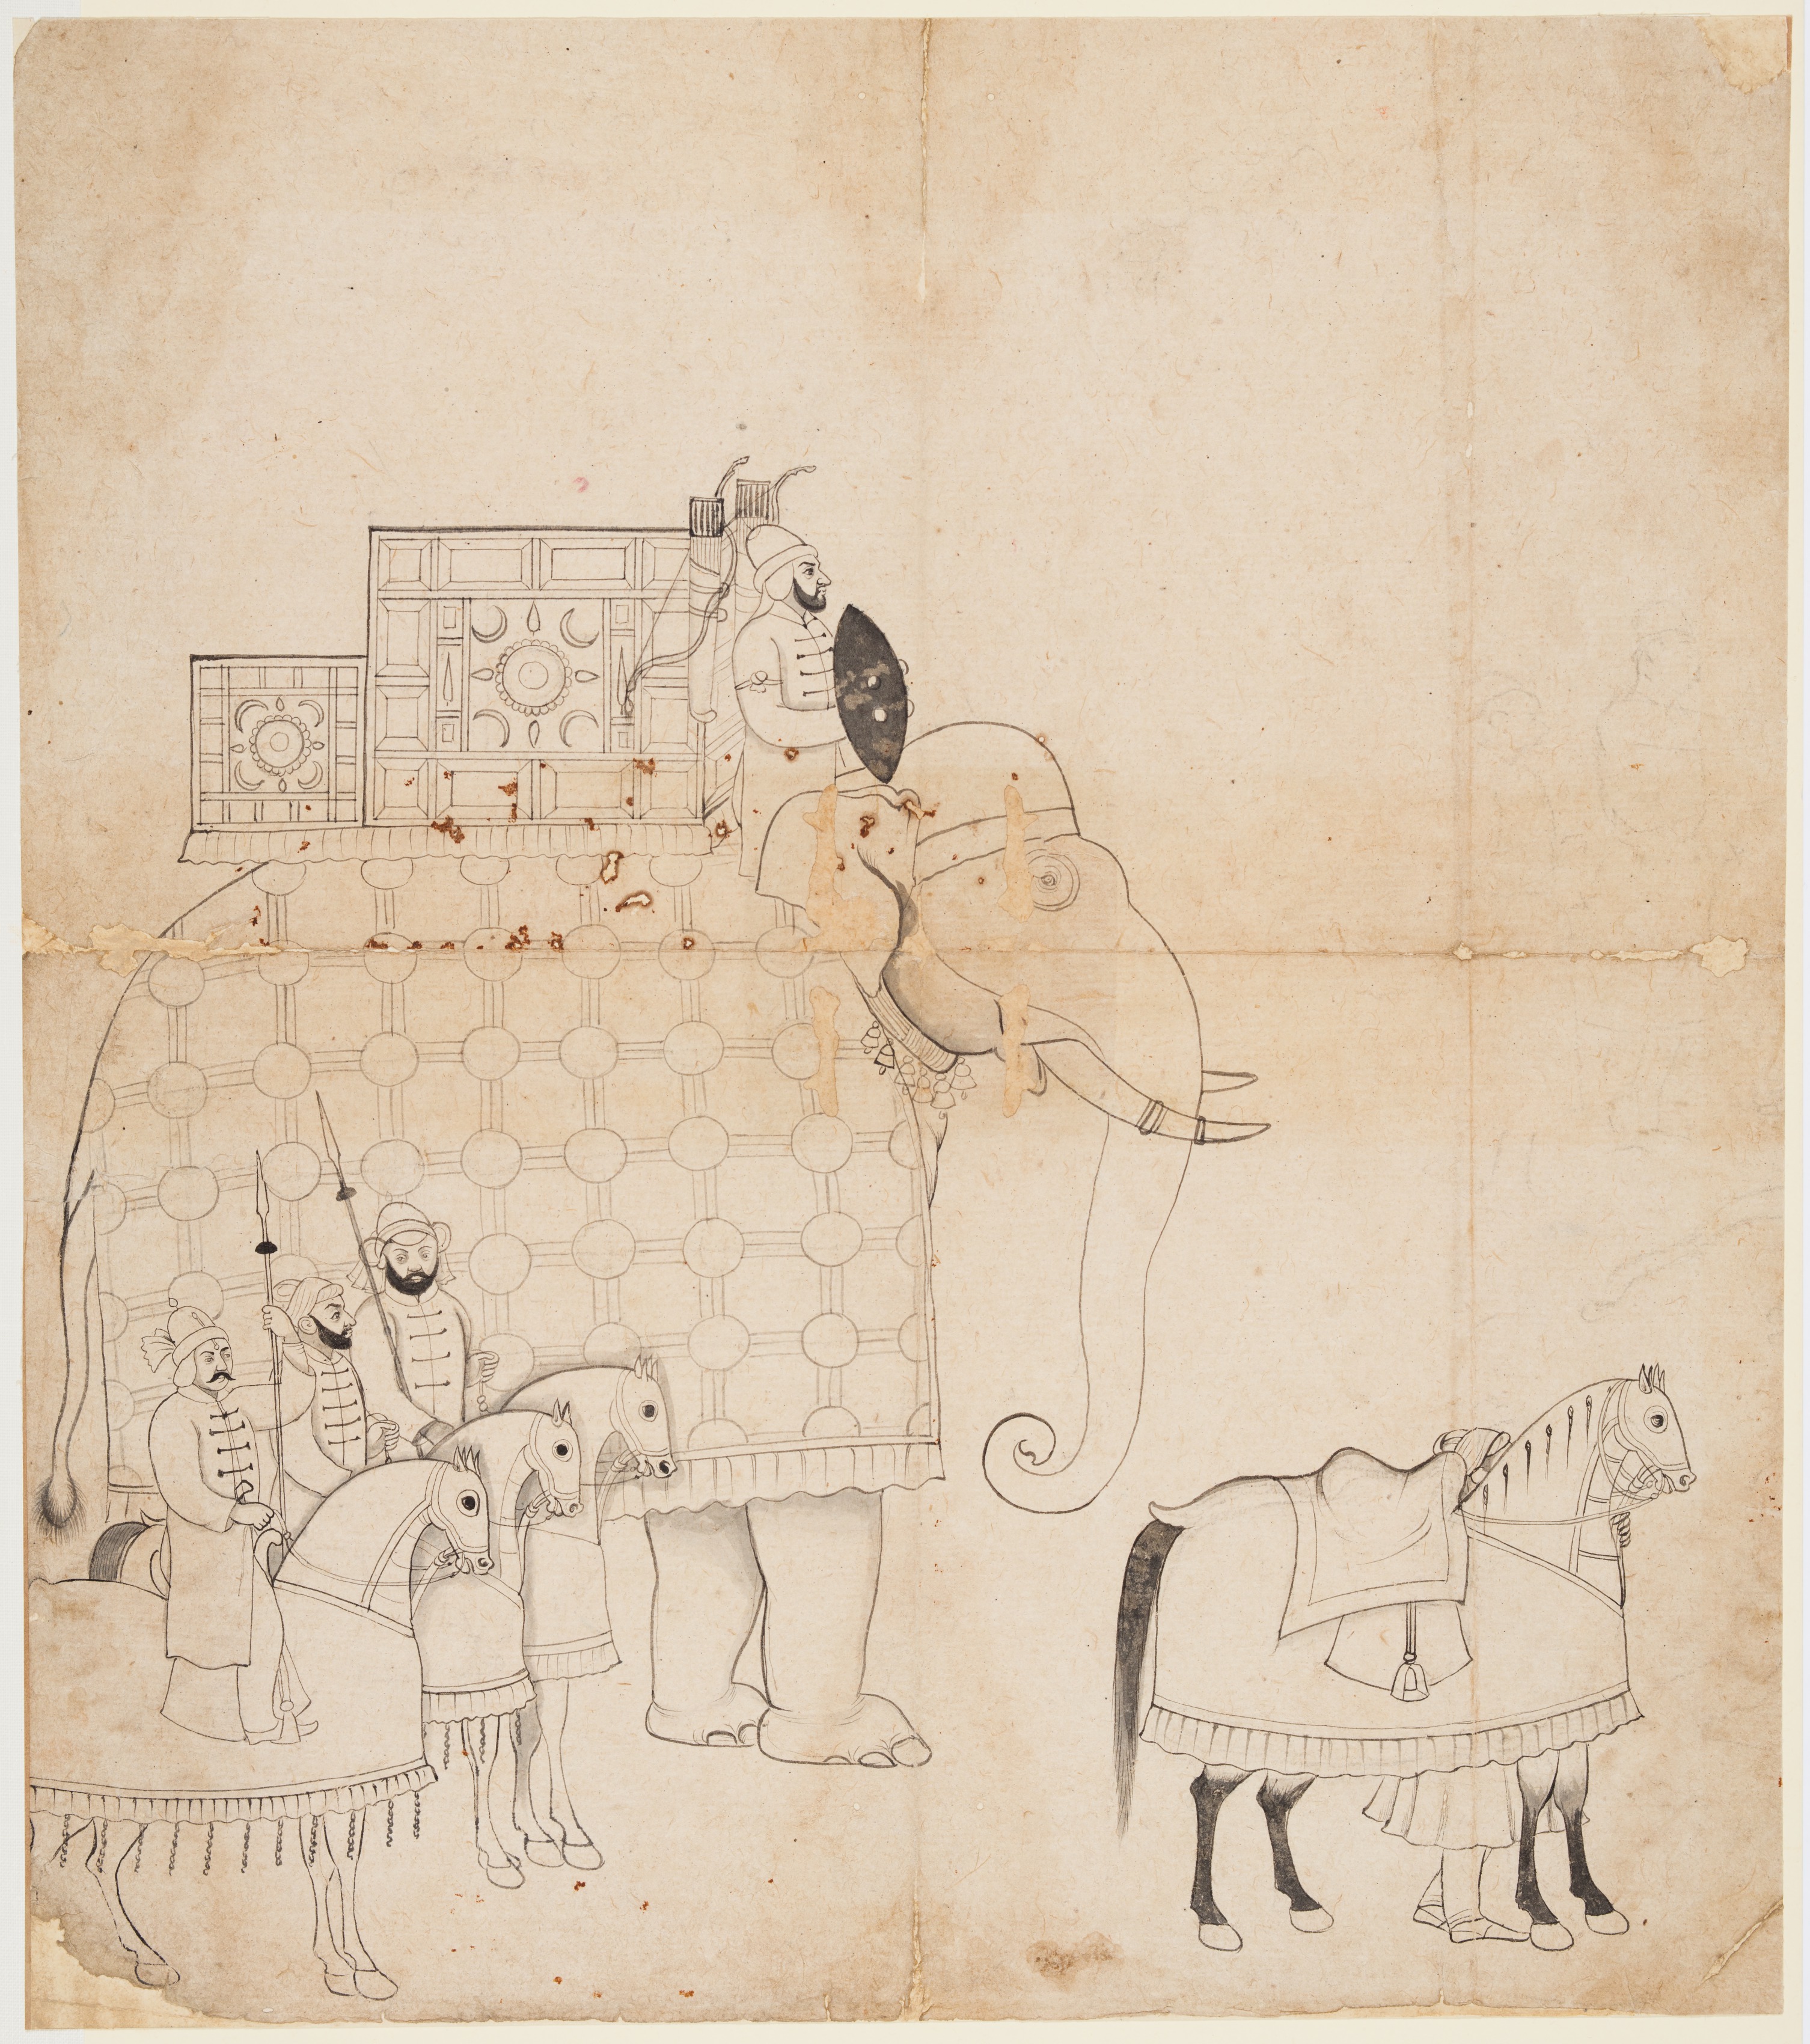 A drawing of Caparisoned Elephant and Horses